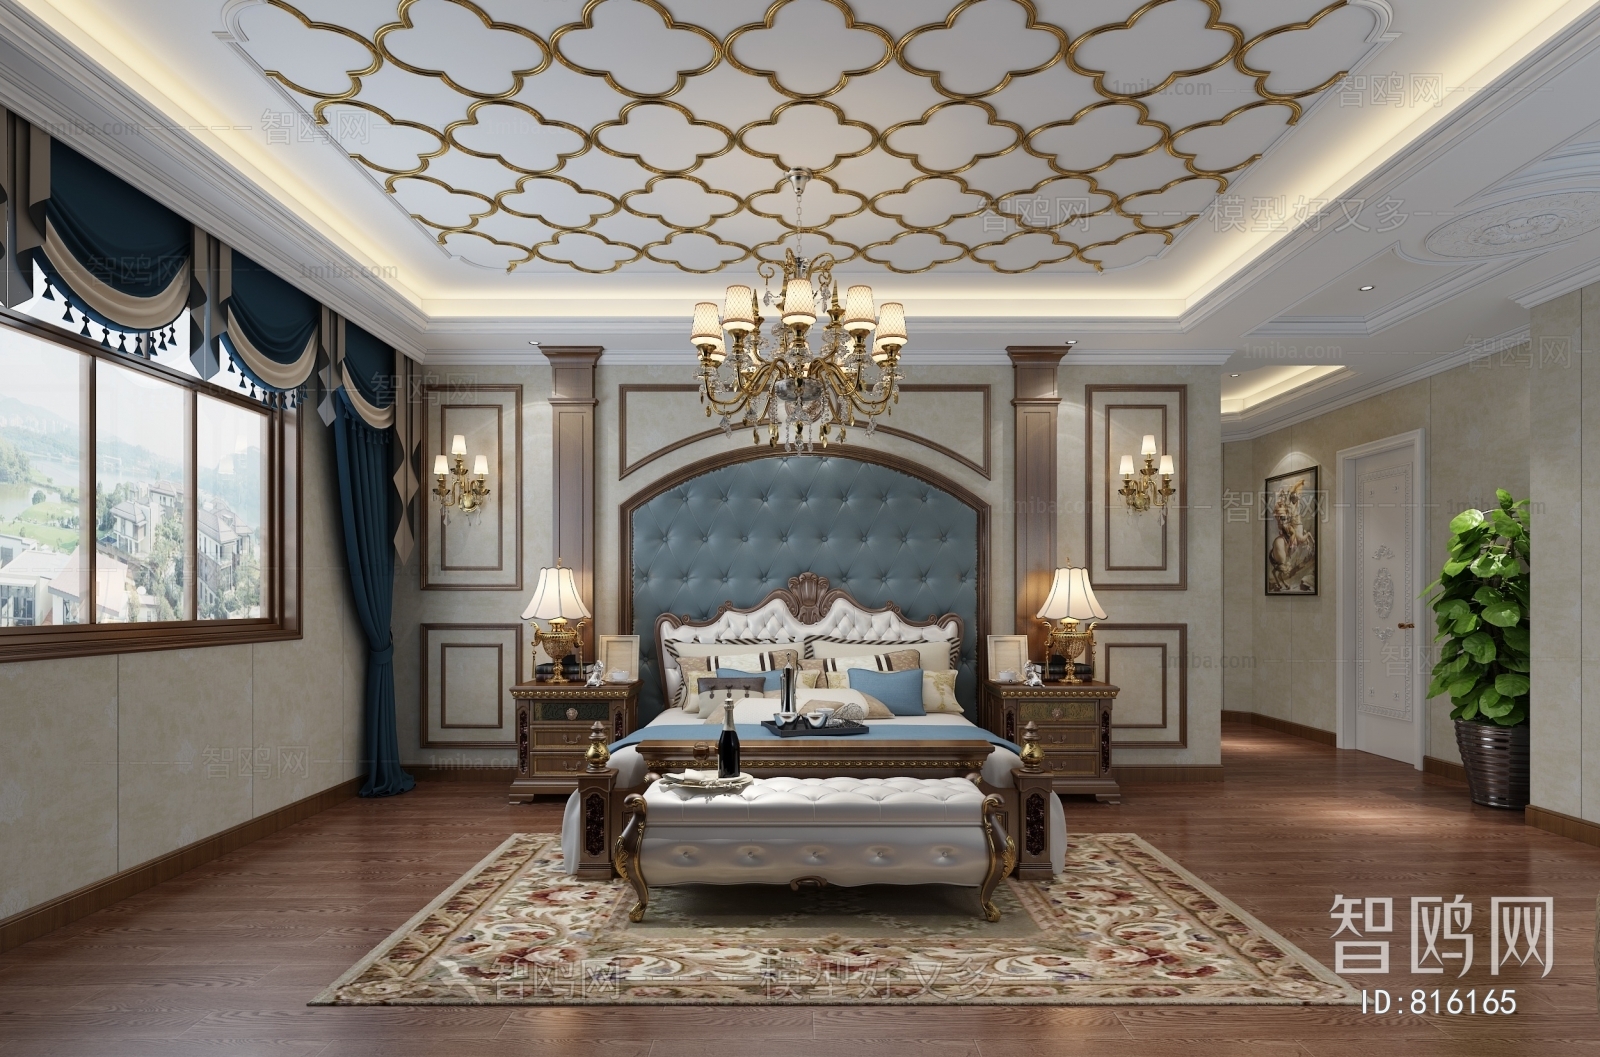 Classical Style Bedroom